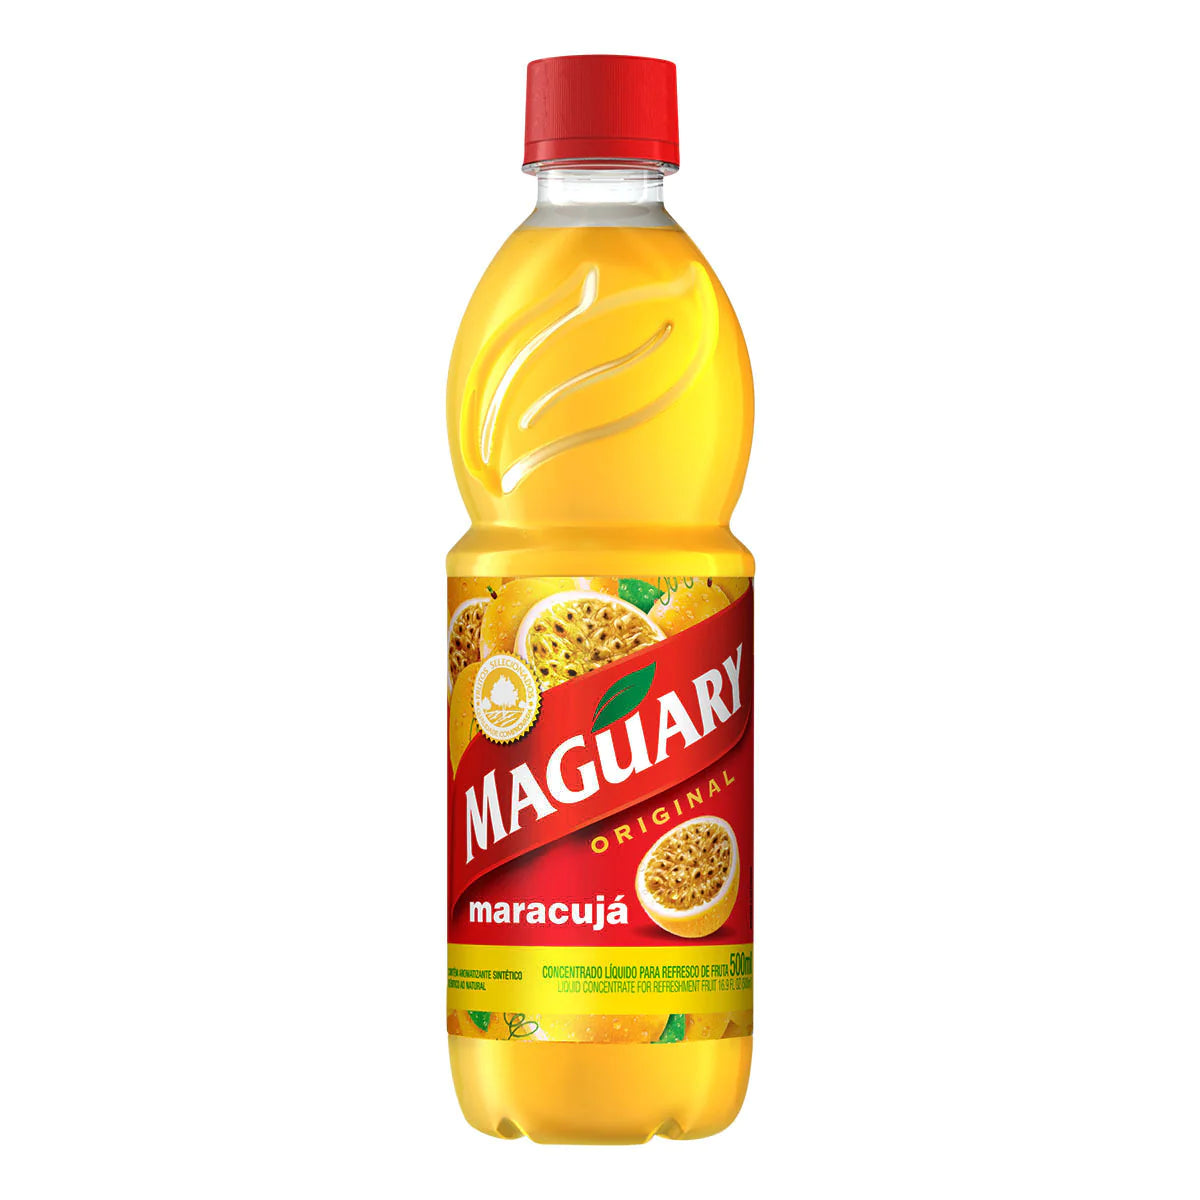 MAGUARY - Passionfruit Concentrated Juice - 500ml - FINAL SALE - EXPIRED or CLOSE TO EXPIRY